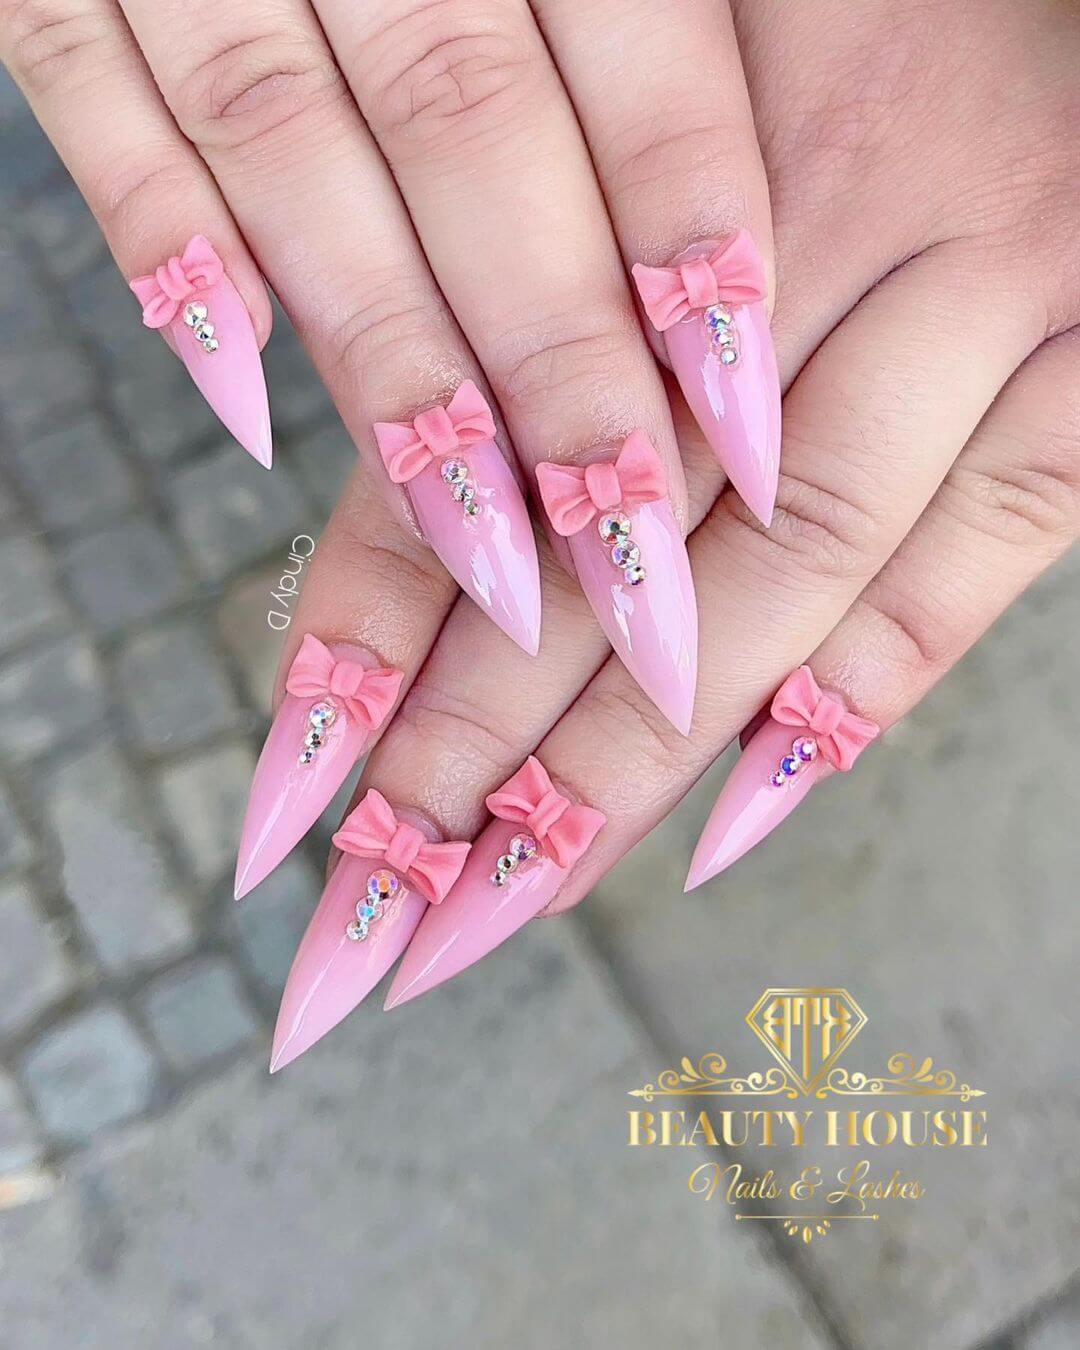 Bow Tie Nail Art Designs Pink Nails With 3D Bow Tie